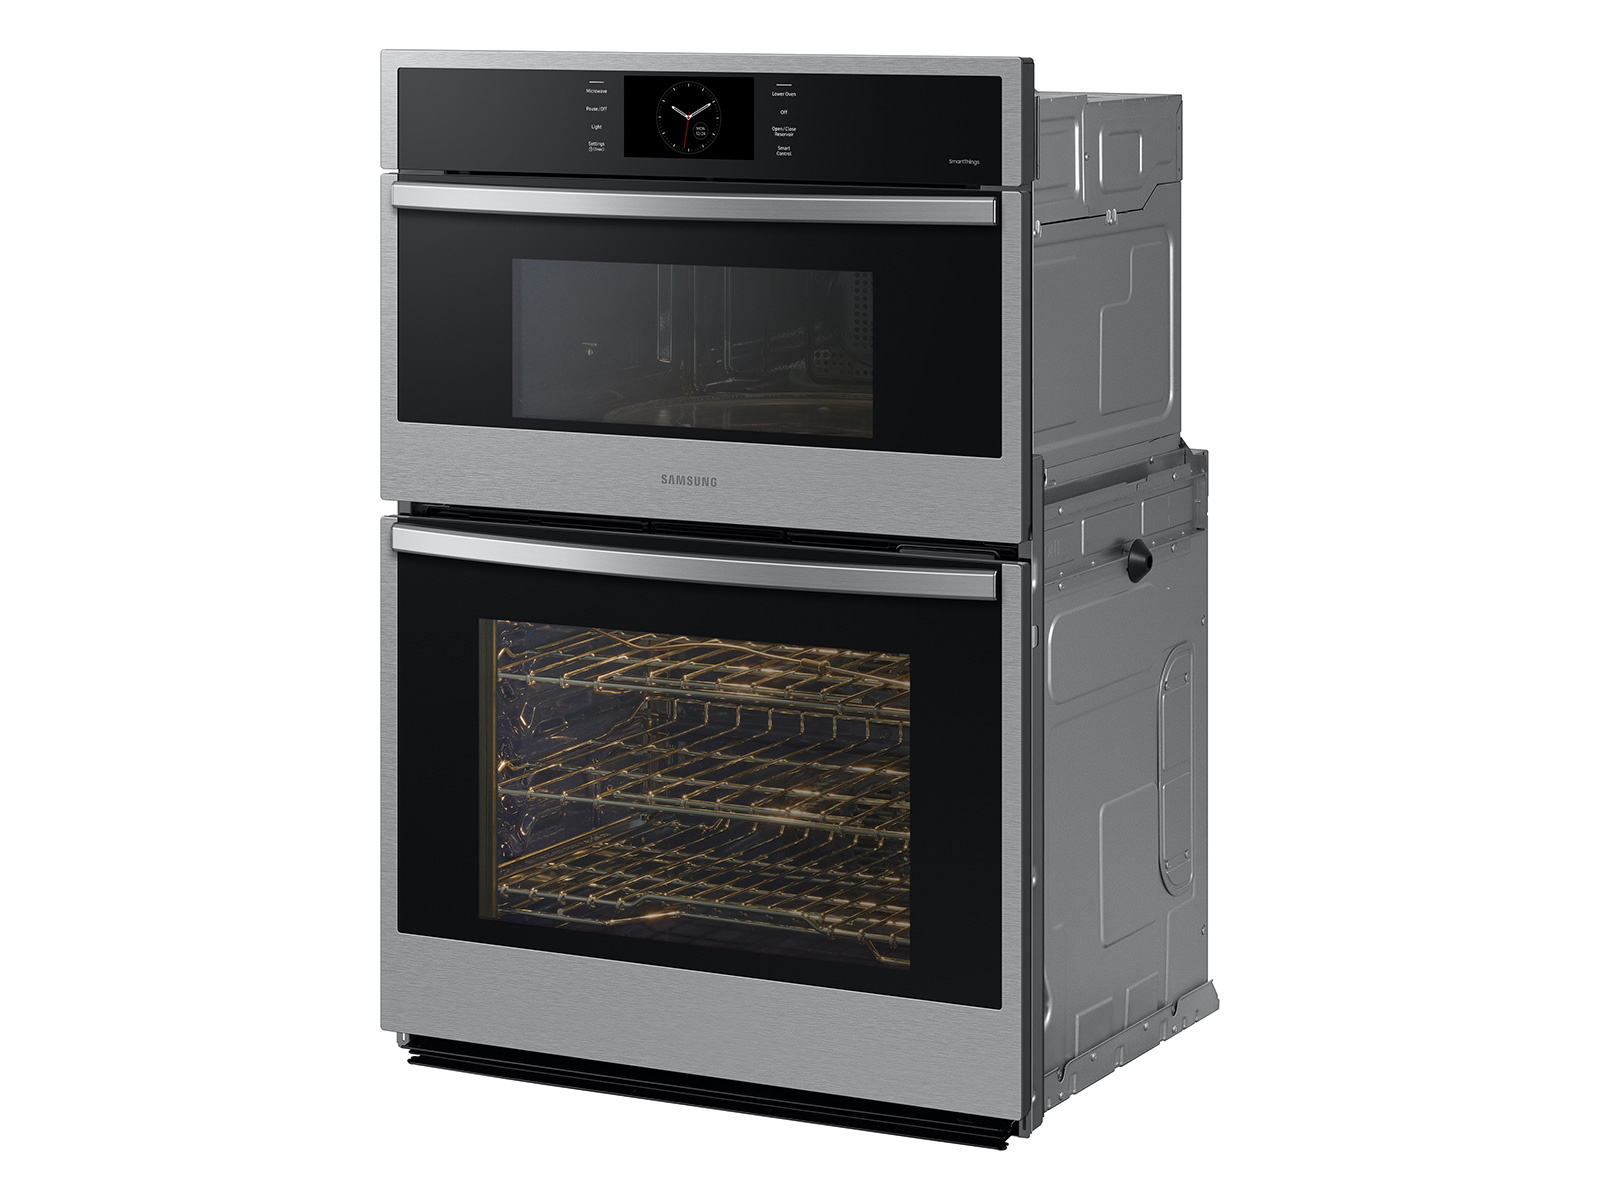 Air Fry Microwave Wall Oven Combinations at